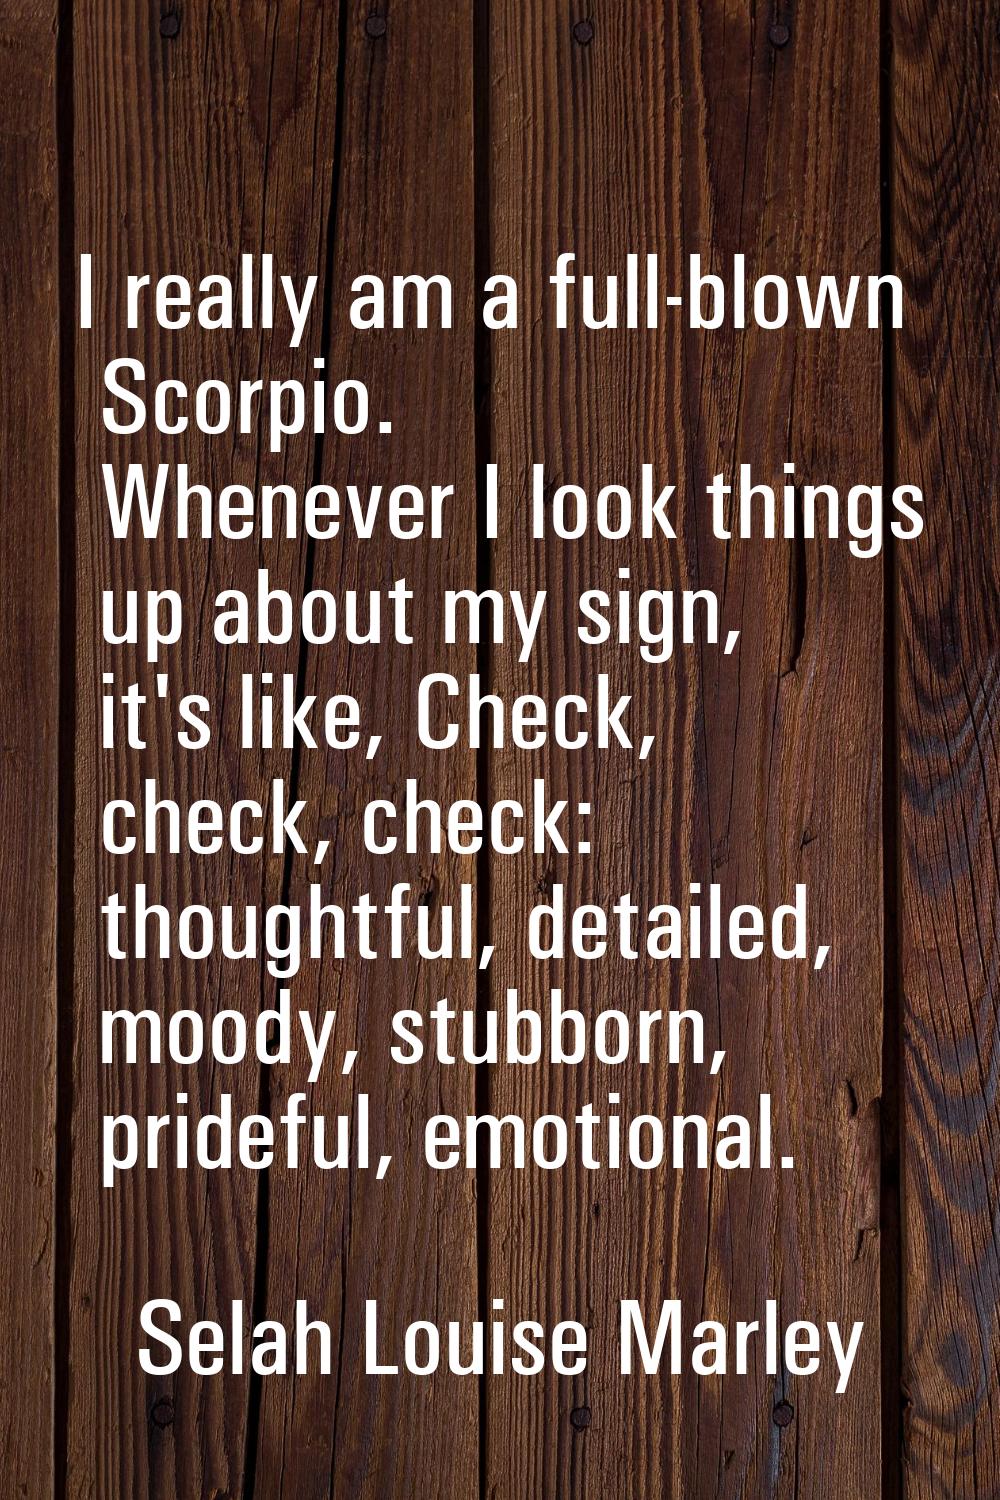 I really am a full-blown Scorpio. Whenever I look things up about my sign, it's like, Check, check,